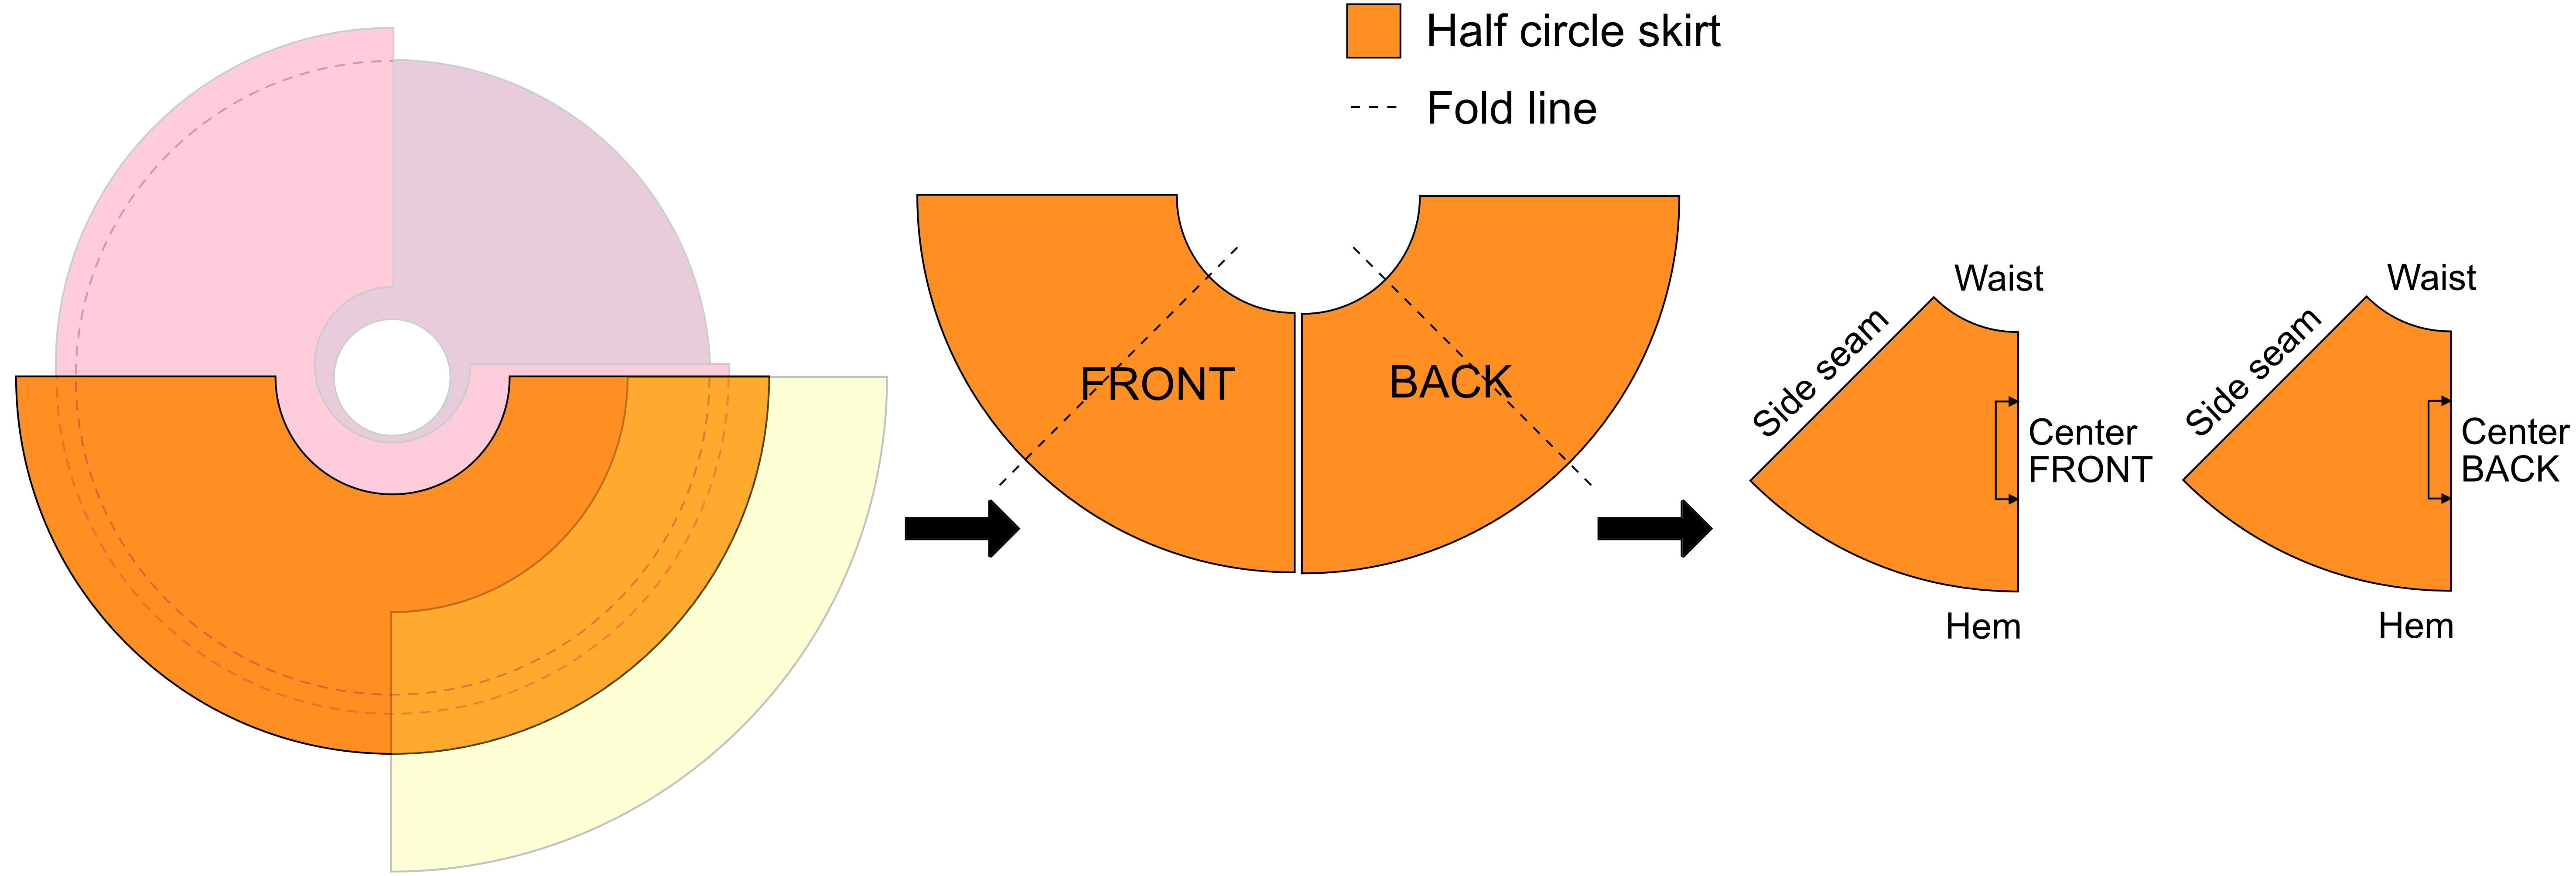 Step by step instructions how to make a half circle skirt pattern.